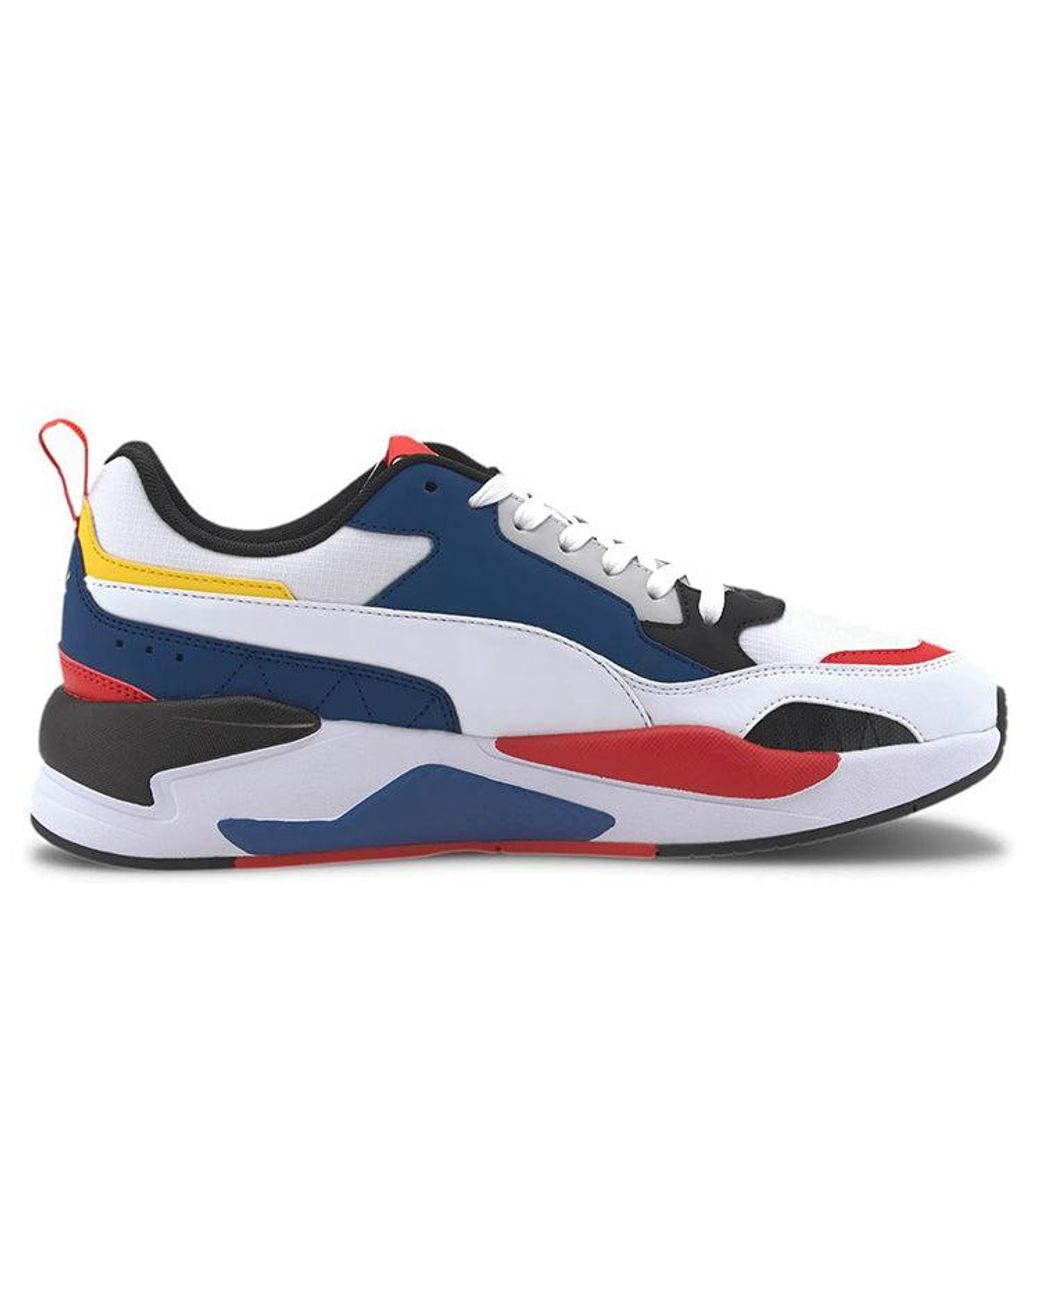 PUMA X-ray 2 Square Pack Low Running Shoes Blue/red/white for Men | Lyst